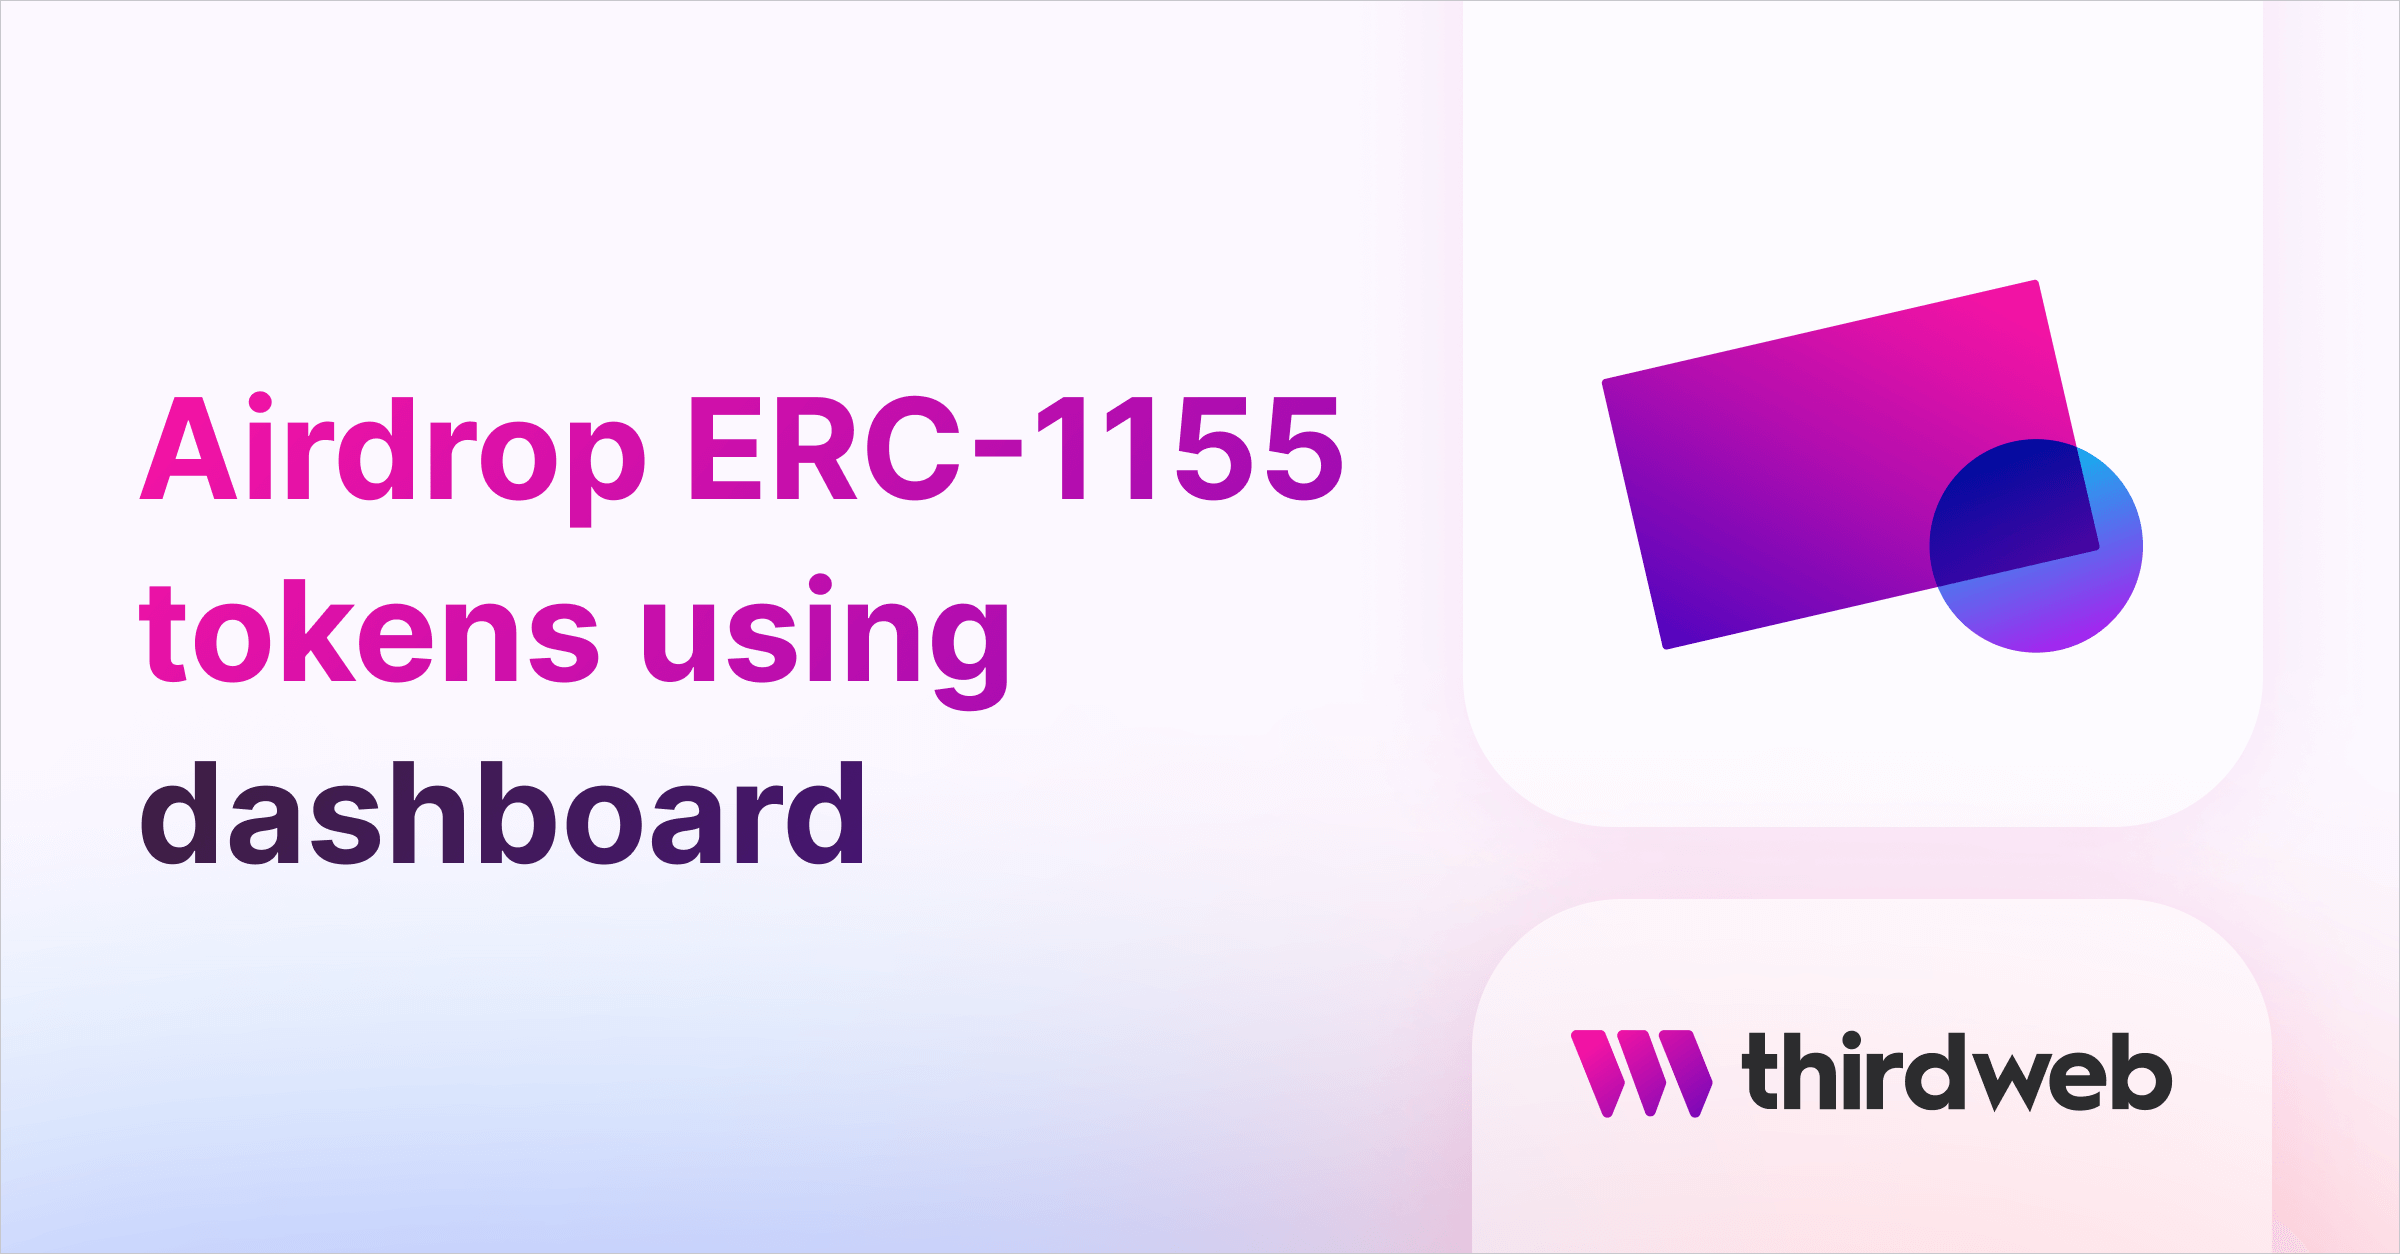 How to Airdrop ERC-1155 NFTs to a List of Wallet Addresses - thirdweb Guides